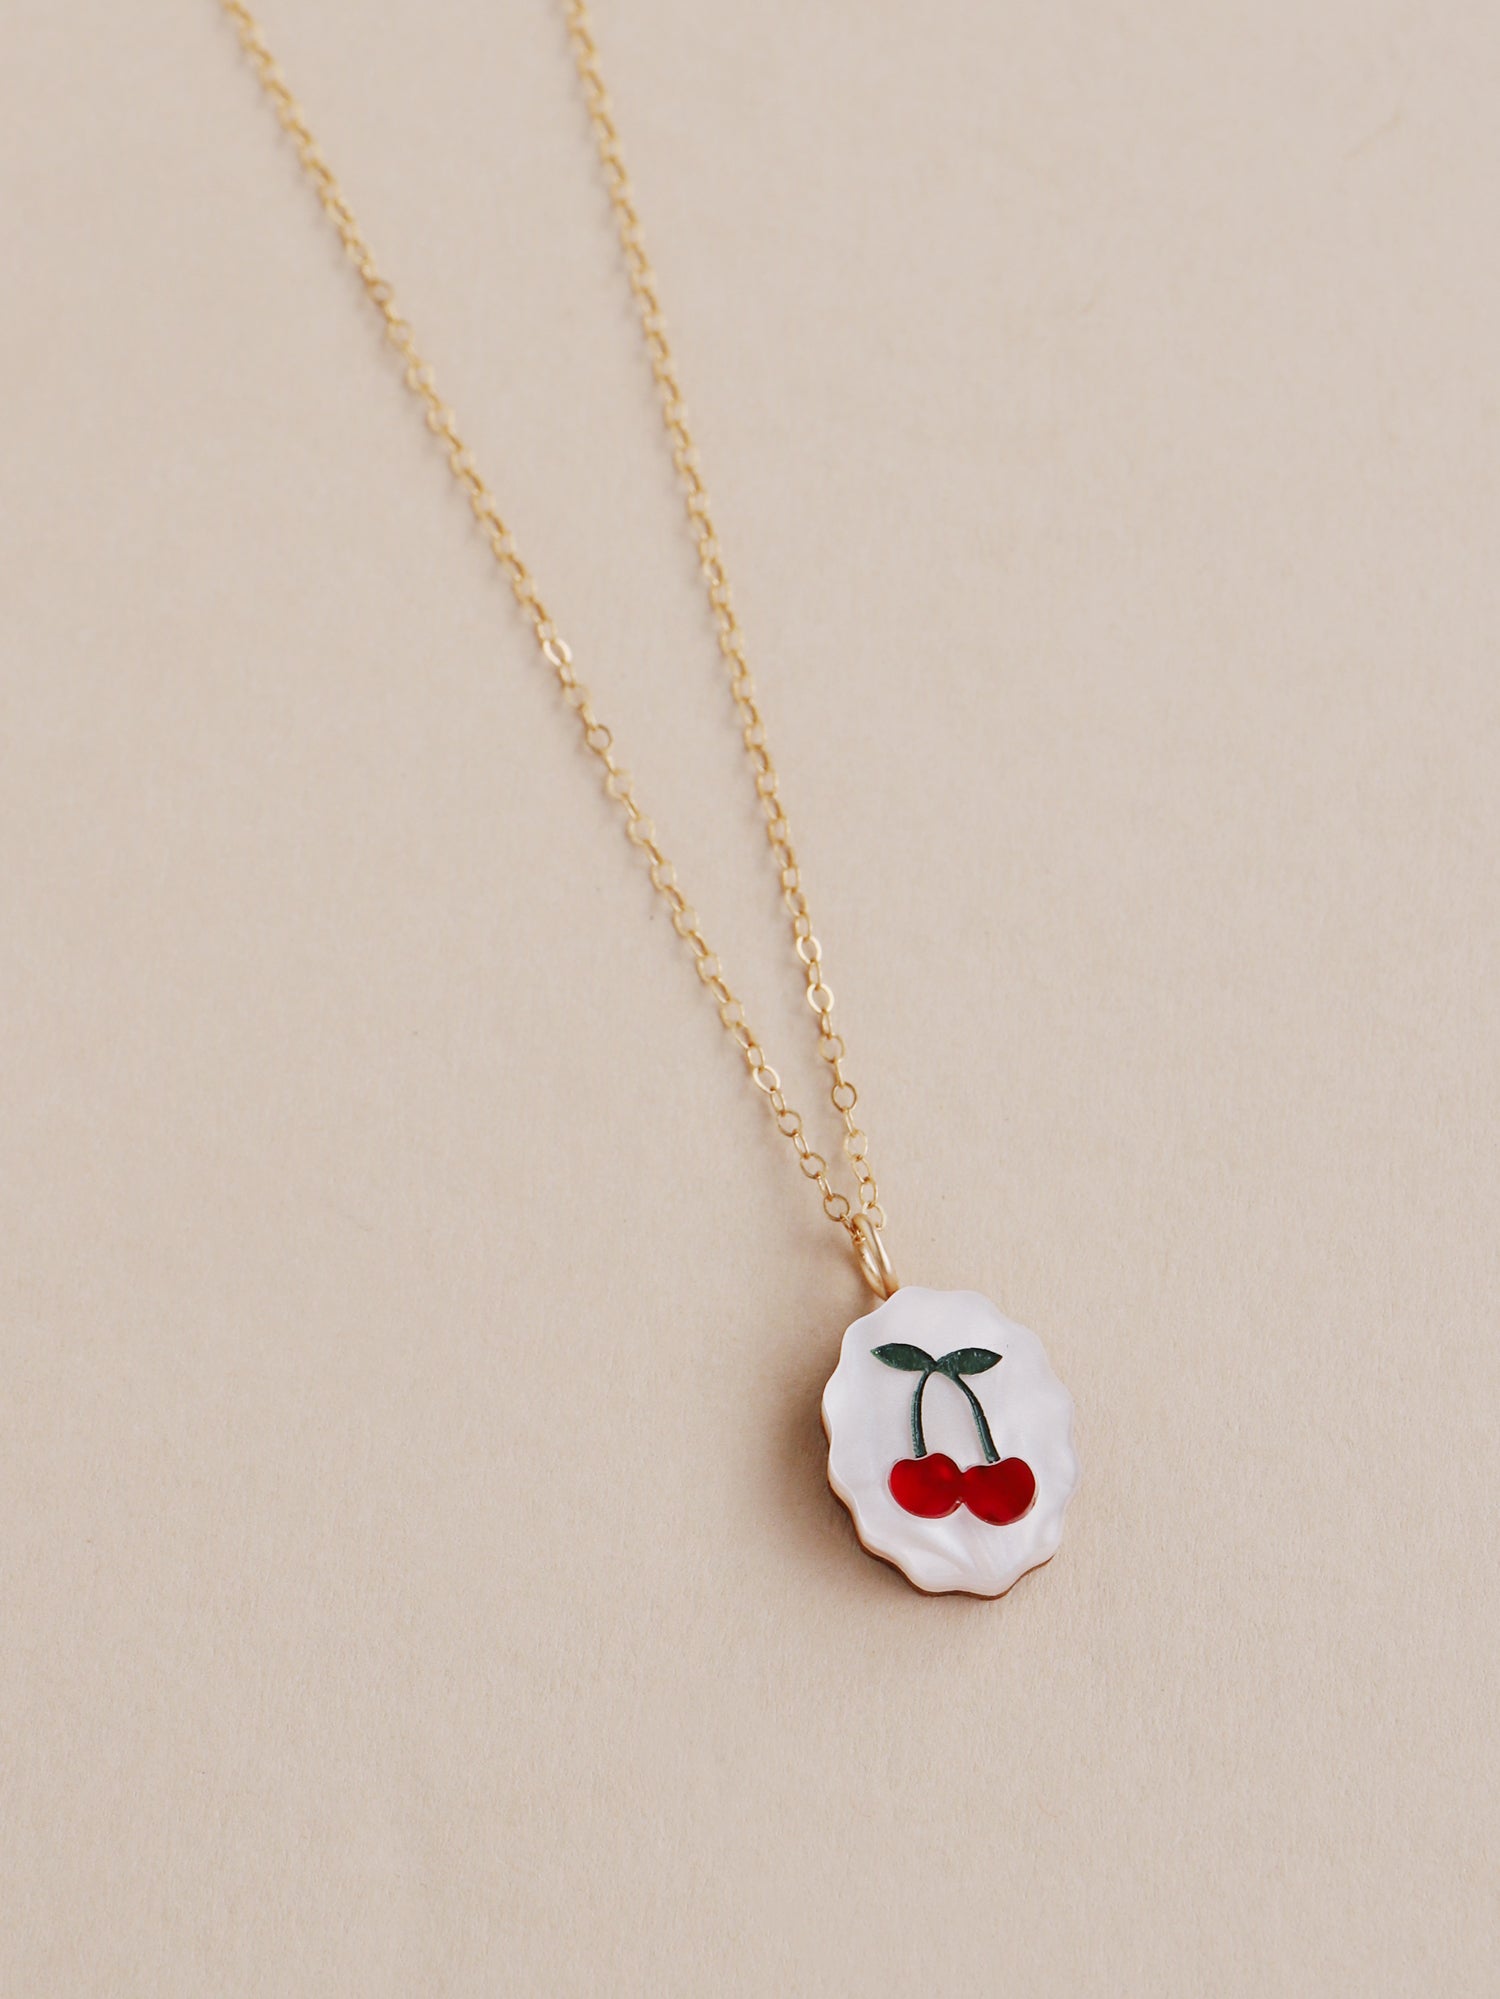 Cherry charm necklace made from acrylic and a 14k gold-filled chain & findings. Handmade in the UK by Wolf & Moon